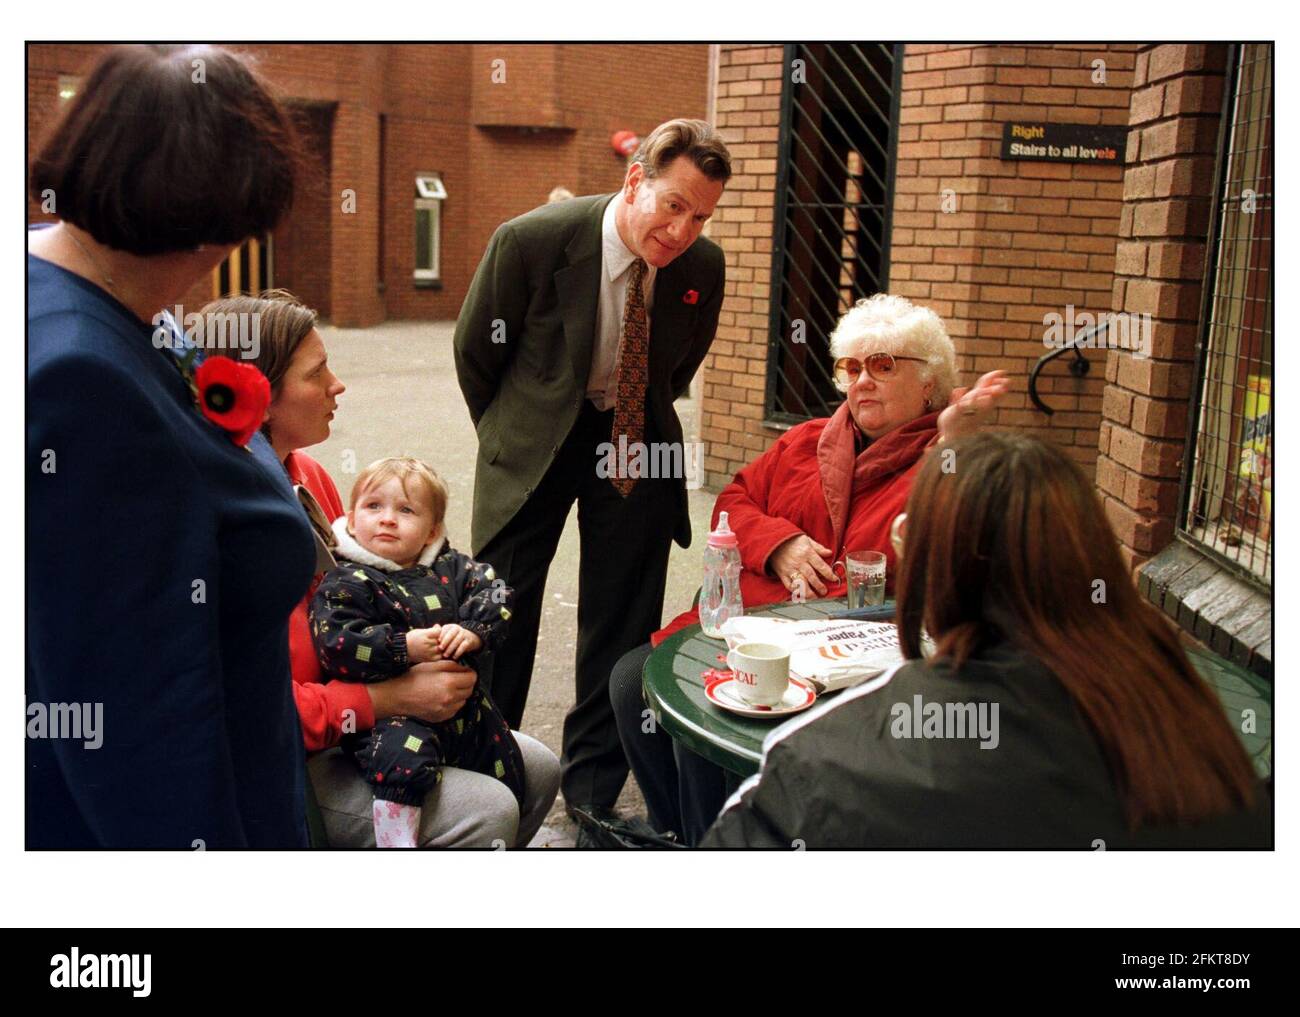 MICHAEL PORTILLO CHELSEA AND WESTMINSTER BY ELECTION NOV99 DOREEN CONDON (70) IN AN UNCOMFORTABLE MEETING WITH MICHAEL PORTILLO ON HIS SHORT TOUR OF THE WORLDS END ESTATE IN CHELSEA. OTHER WOMEN AT THE TABLE ARE TERESA SMITH (JACKET HAS STRIPES) Stock Photo